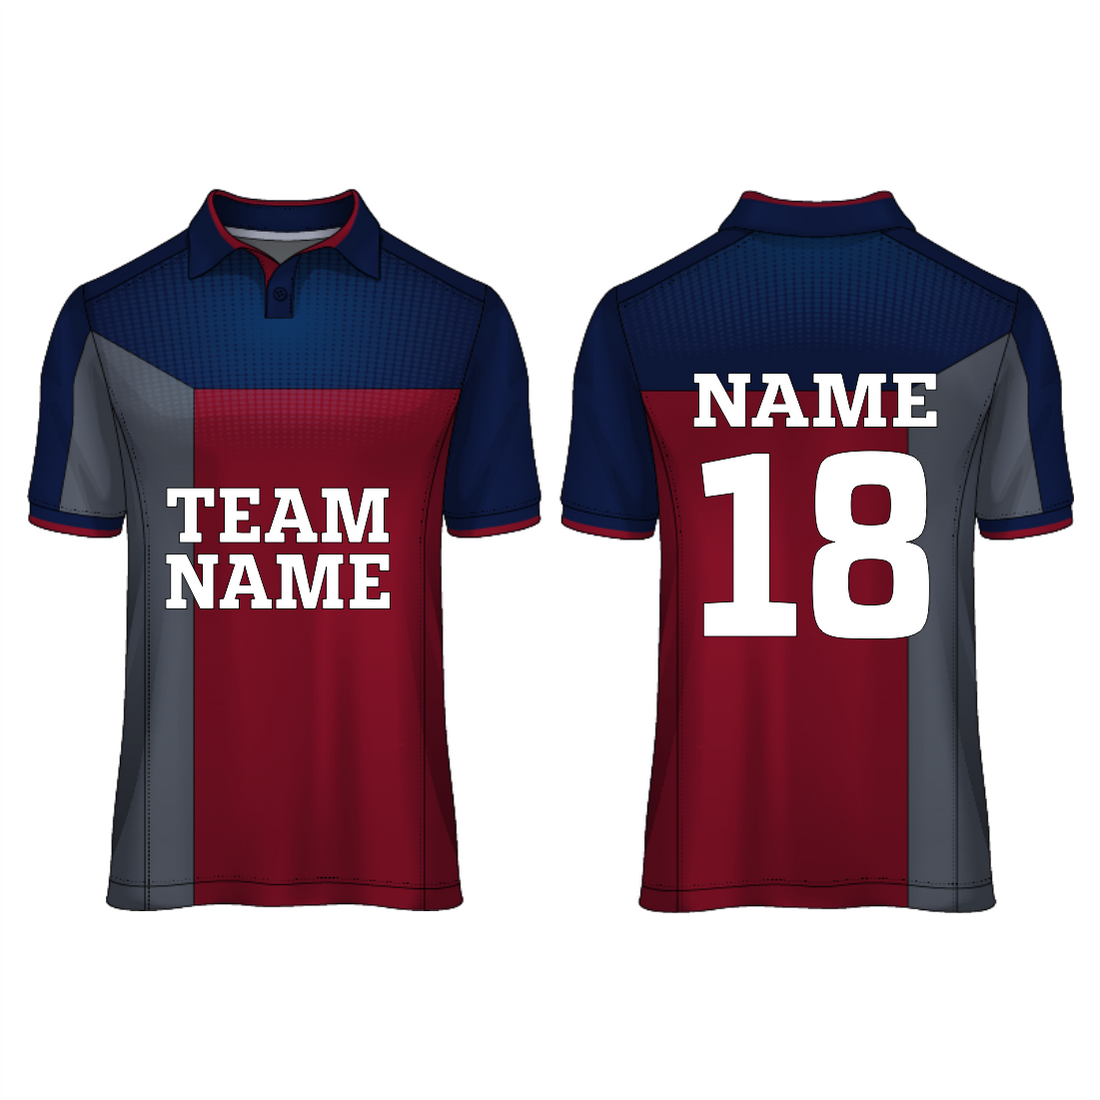 NEXT PRINT All Over Printed Customized Sublimation T-Shirt Unisex Sports Jersey Player Name & Number, Team Name.1310764823